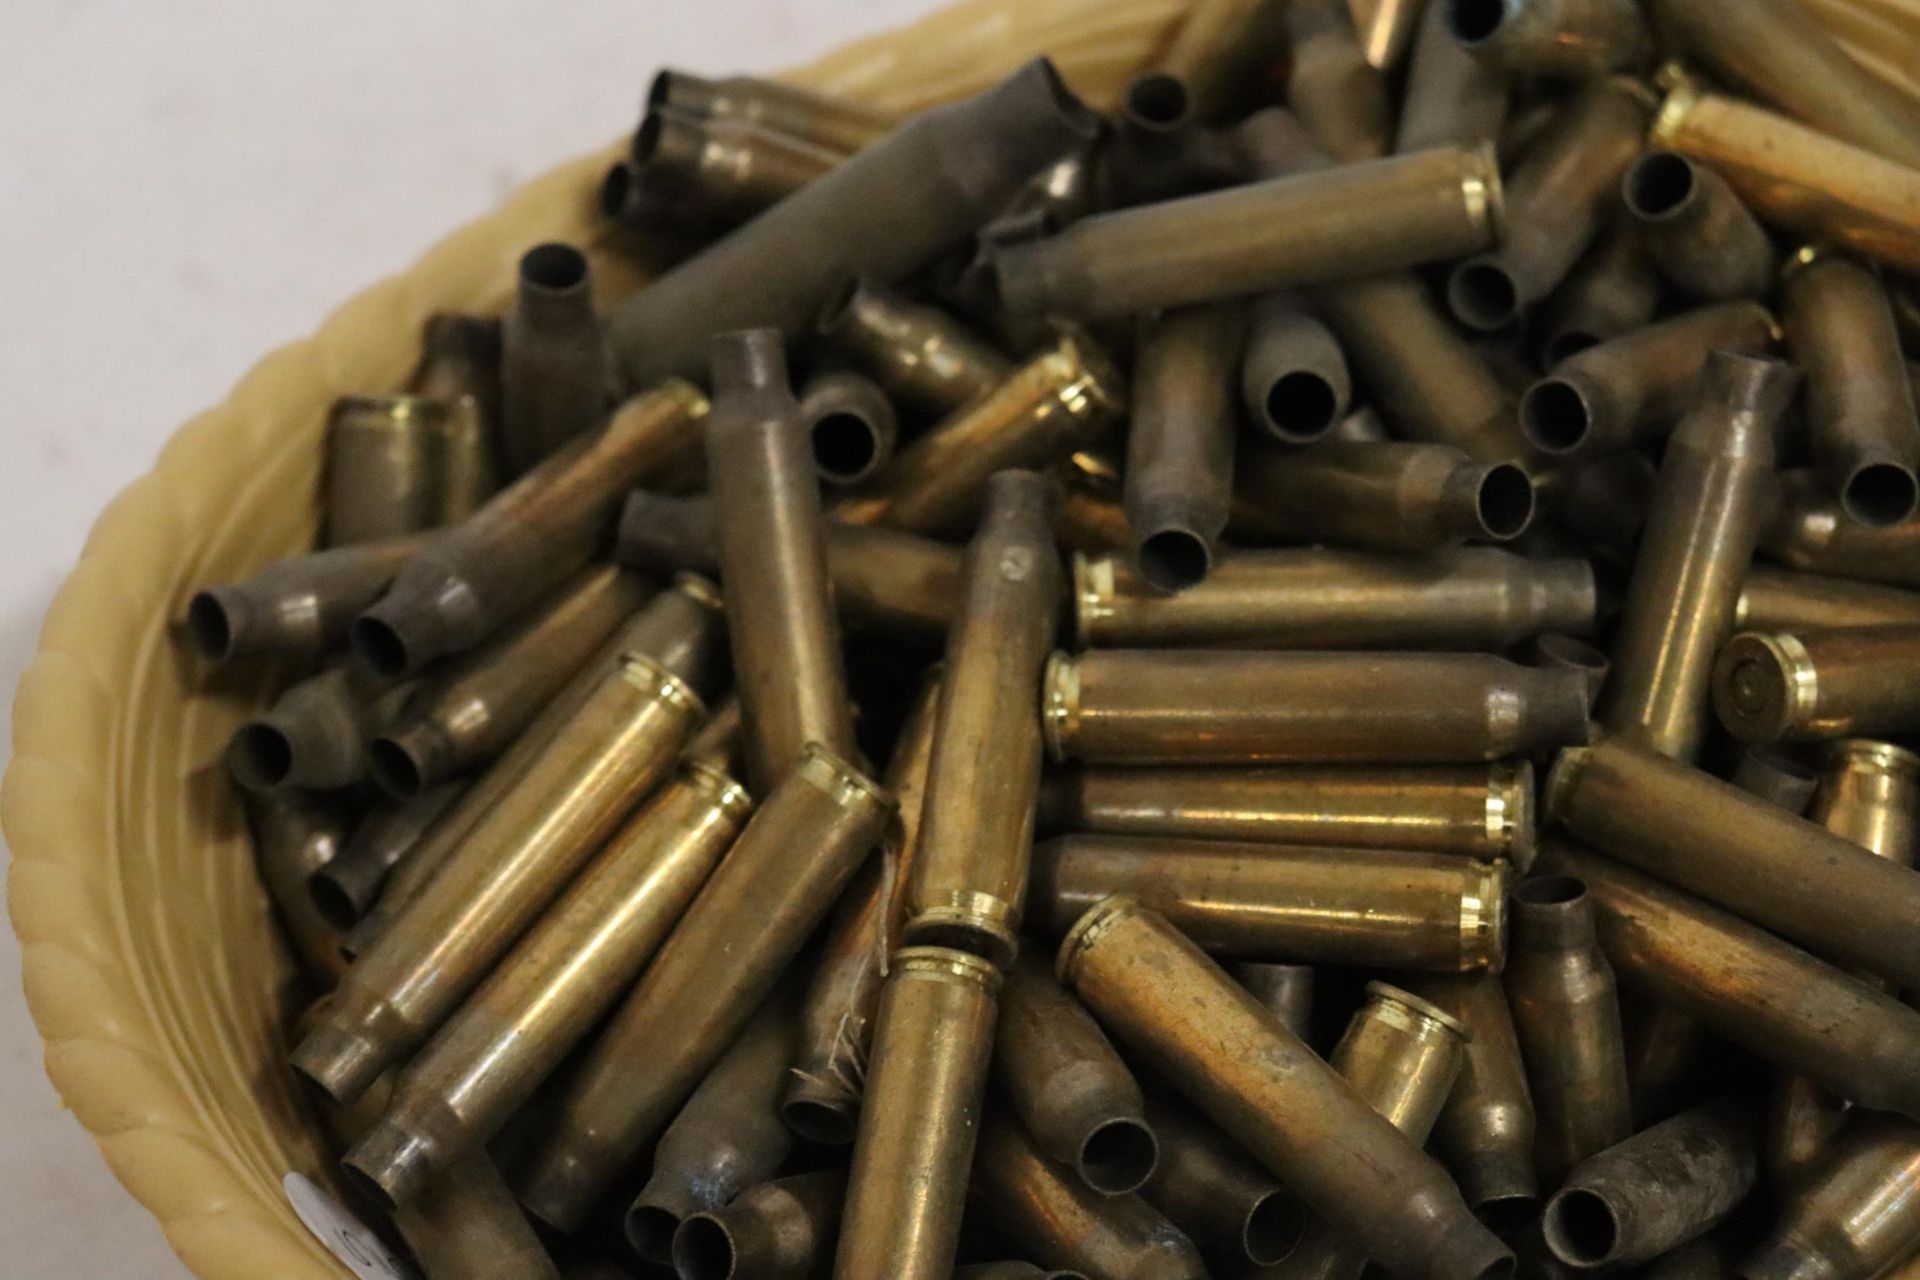 A LARGE QUANTITY OF BRASS BULLET CASINGS - Image 4 of 4